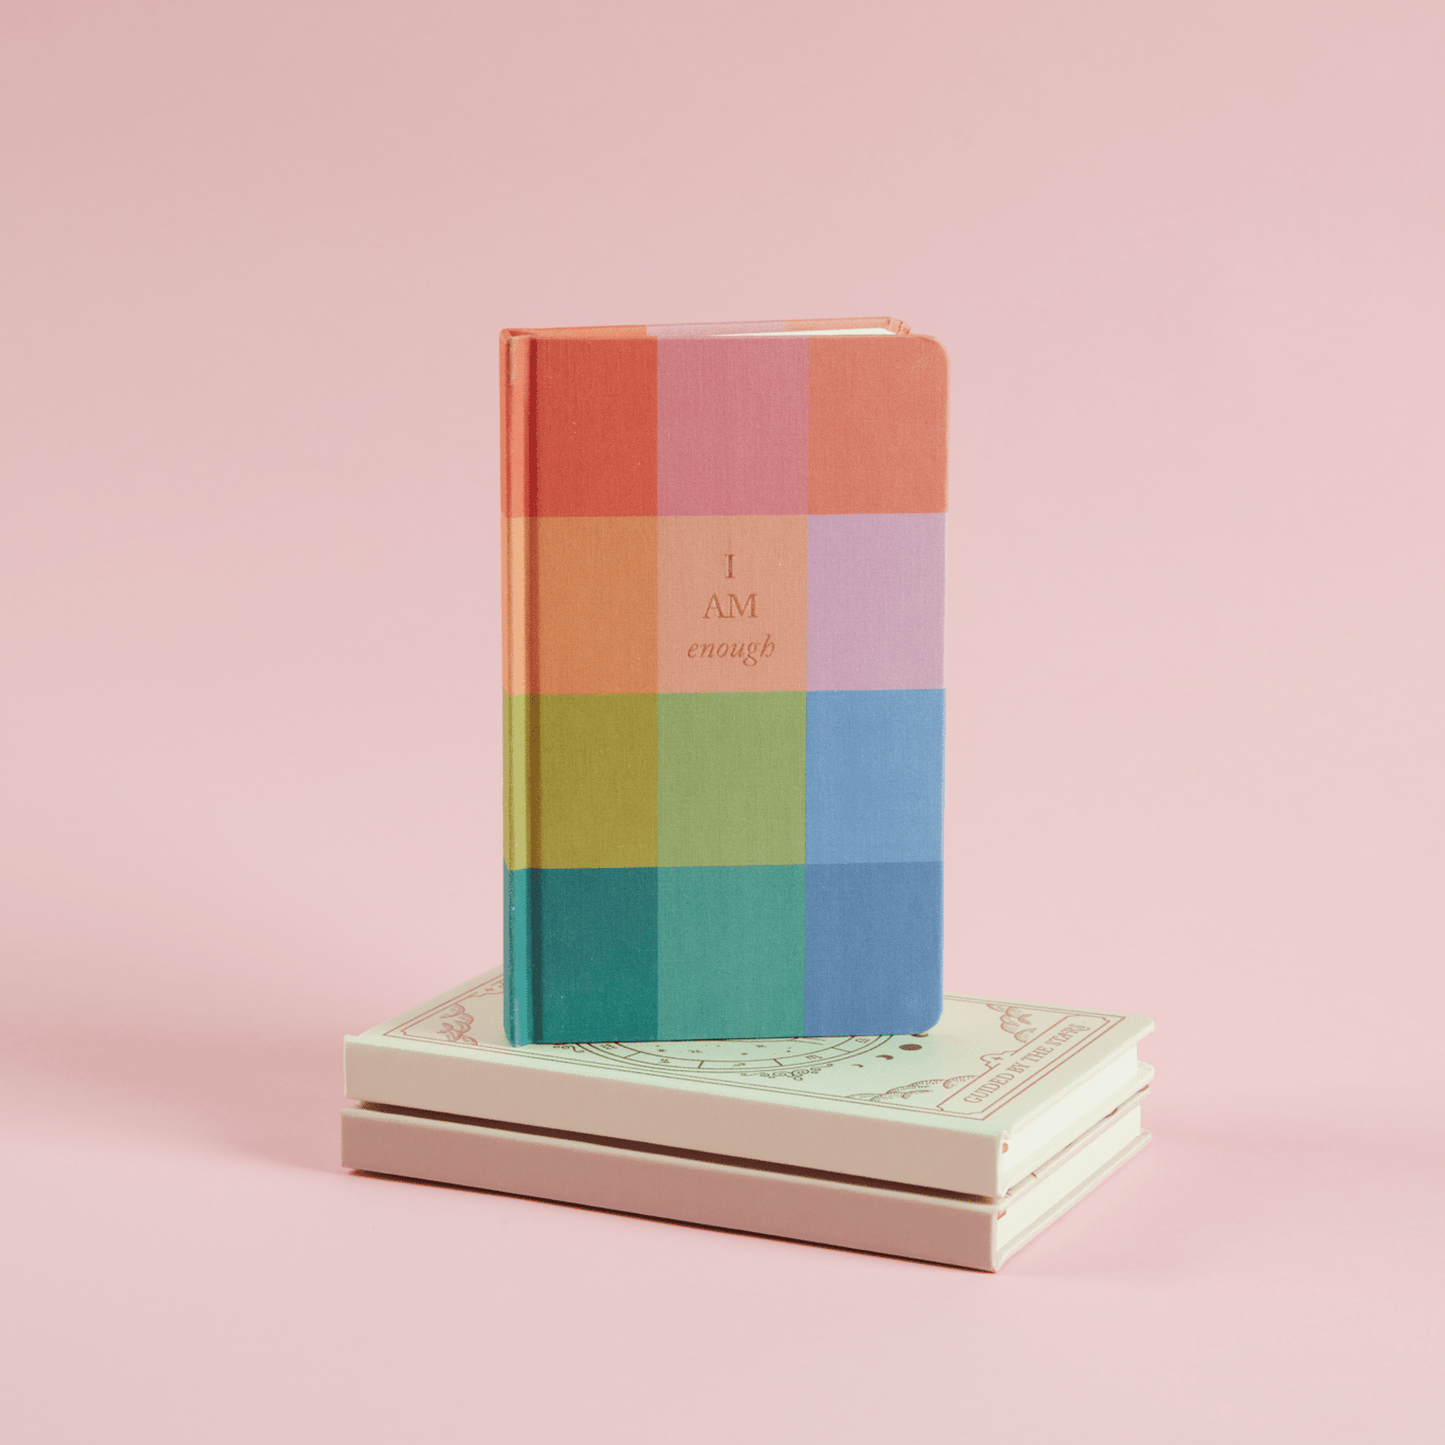 Rainbow check bookcloth journal resting on other journals with a pink background